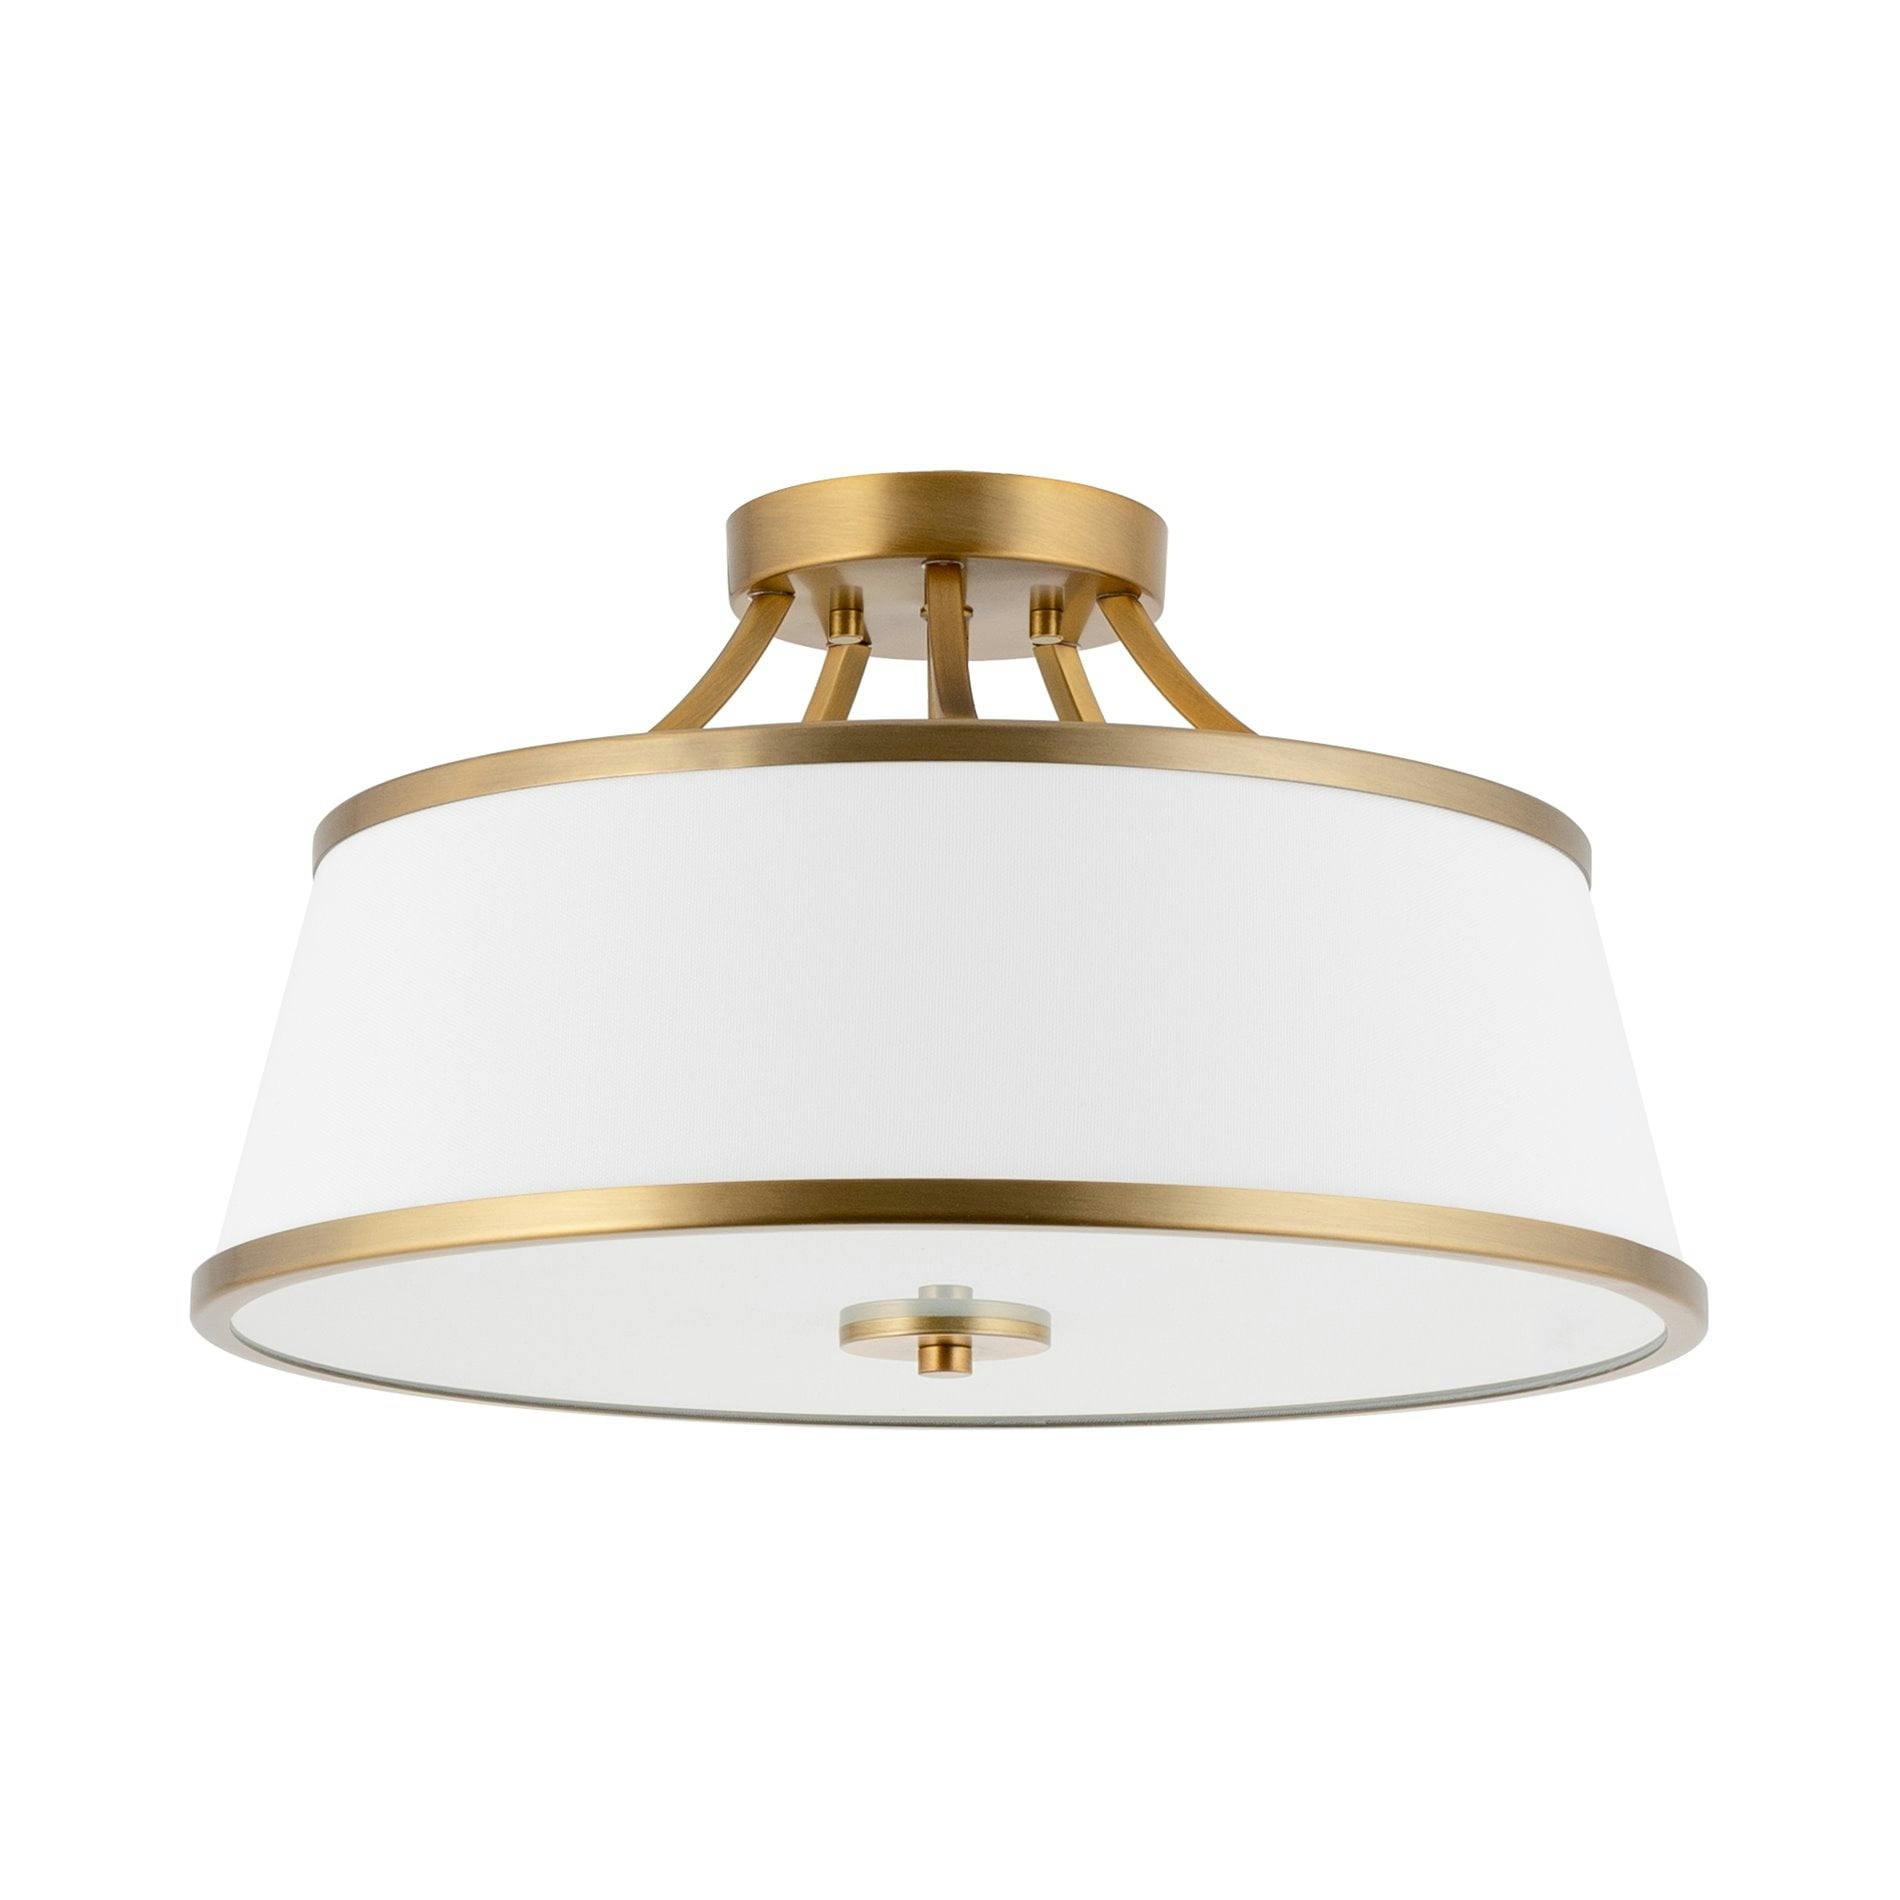 Zoey Warm Brass 17.5" Modern 3-Light Drum Ceiling Light with White Fabric Shade